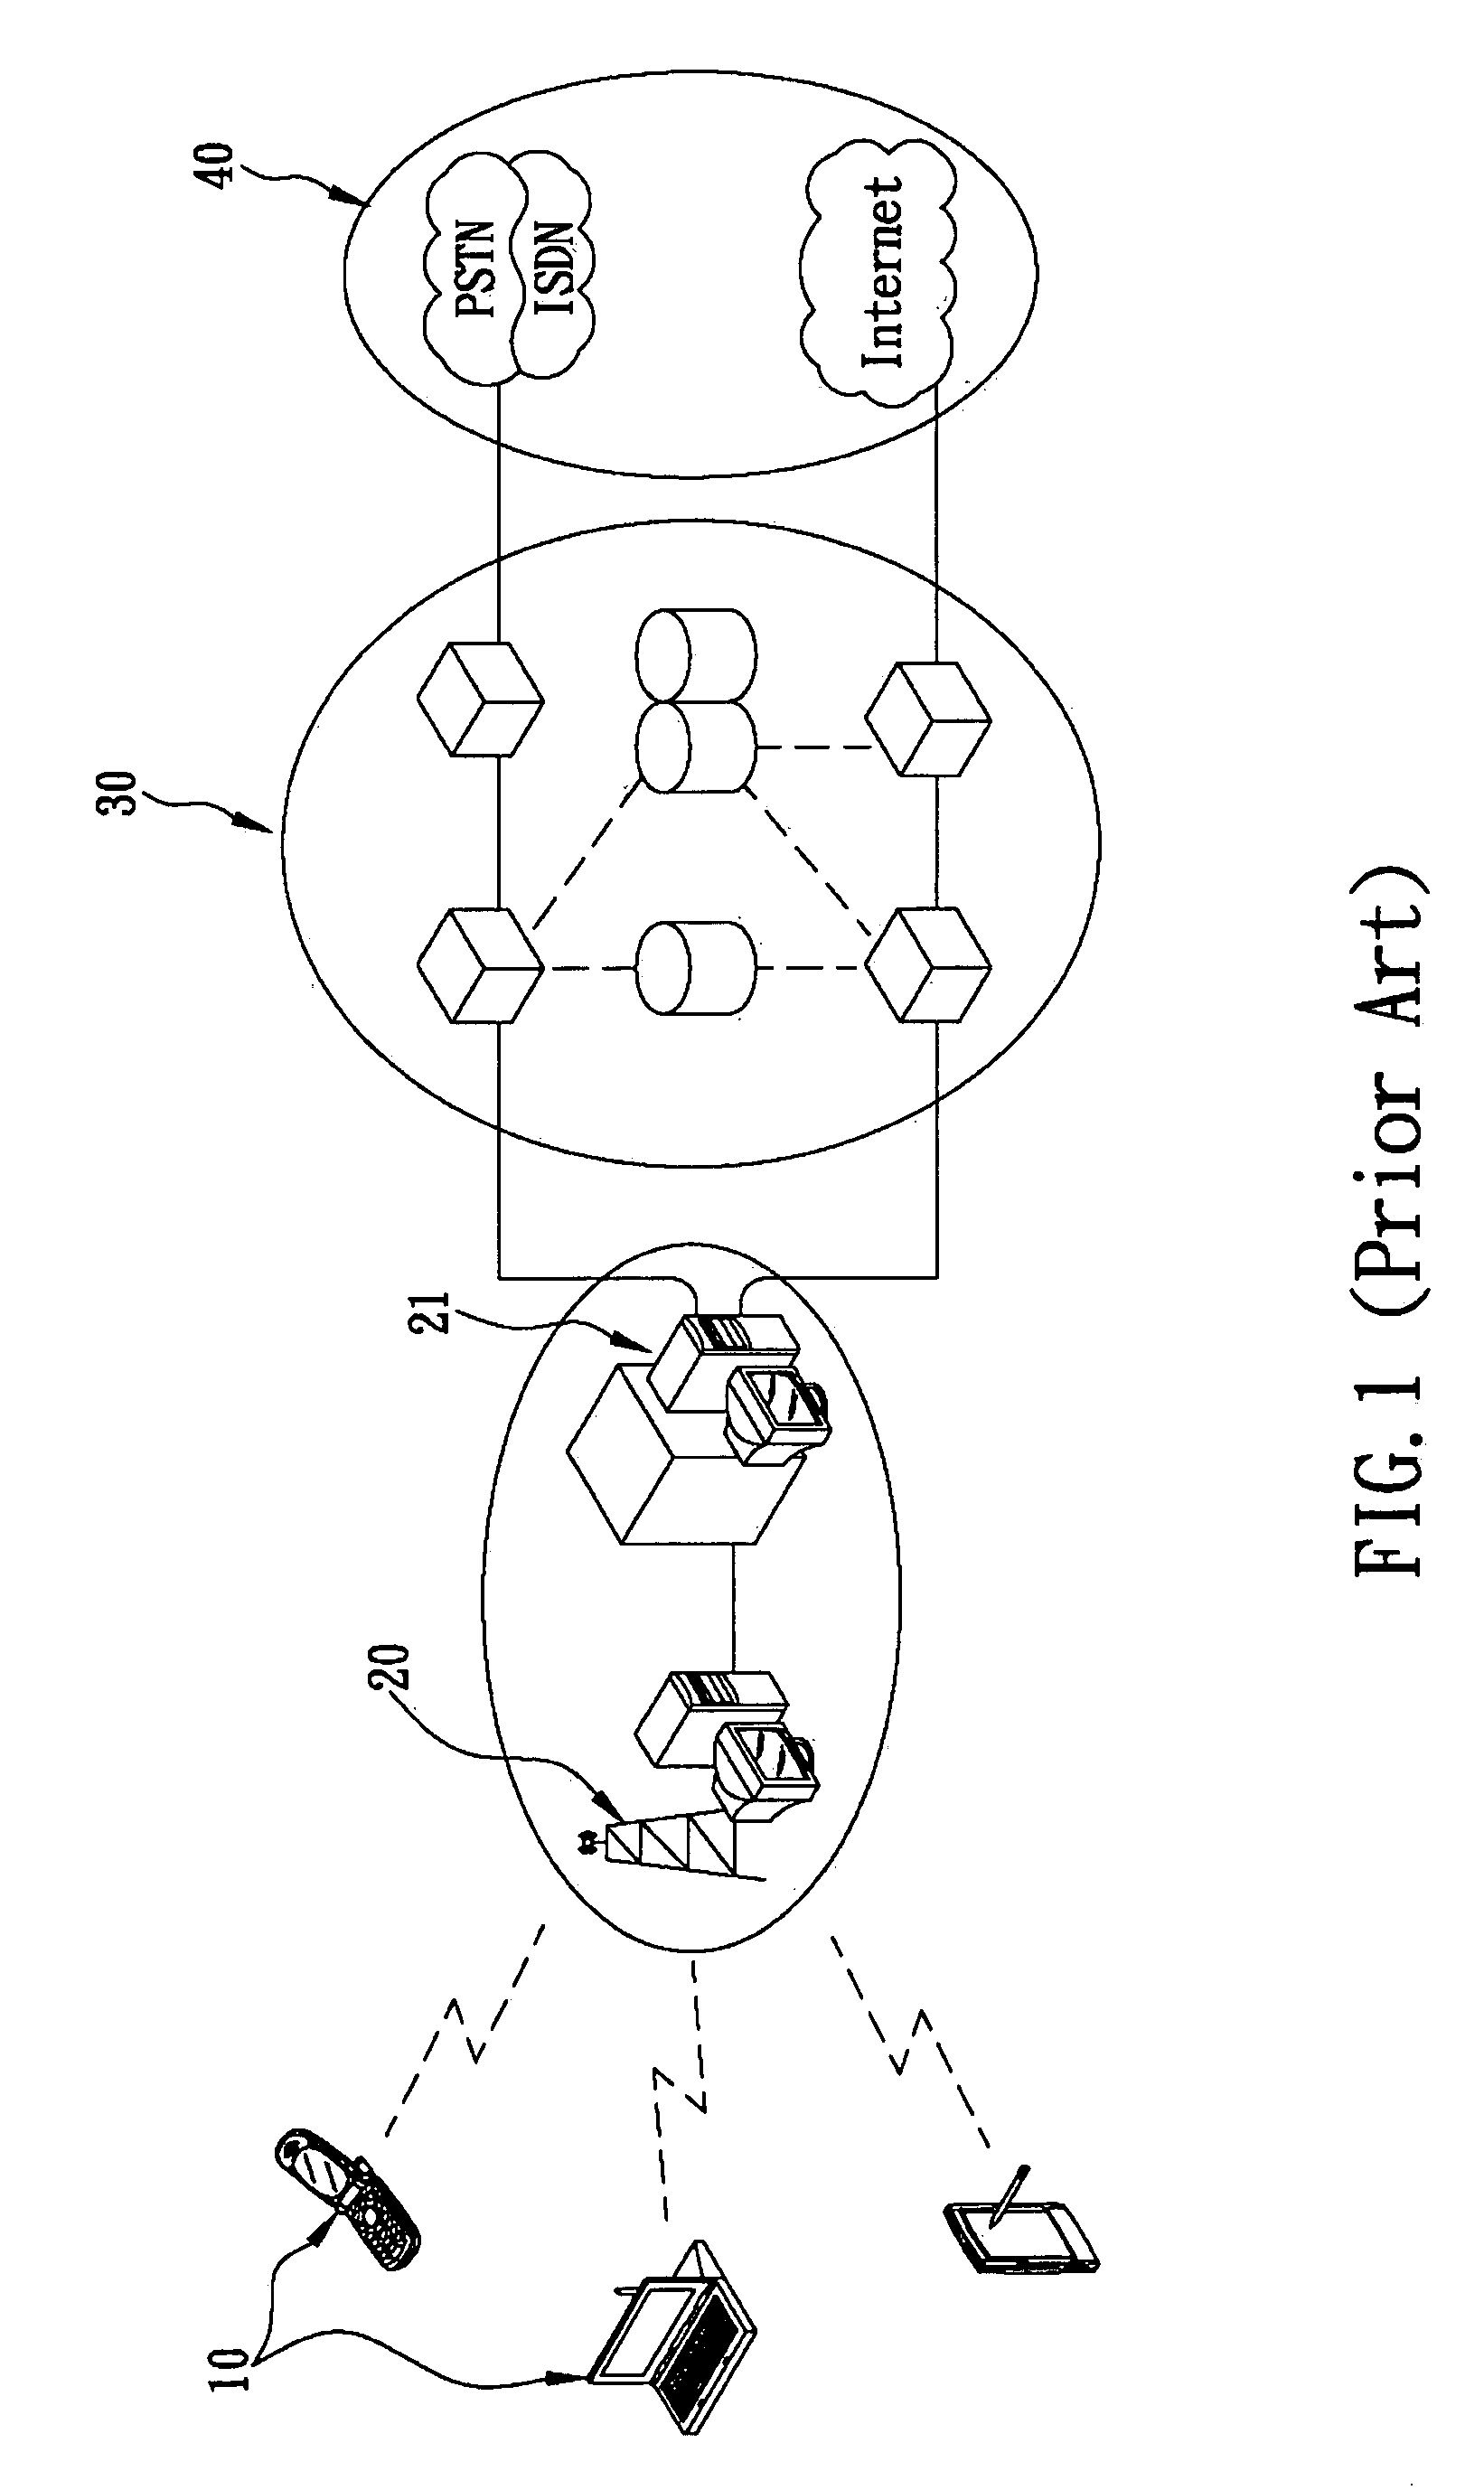 Apparatus and method of 3G mobile communication capable of implementing a multi-channel protocol